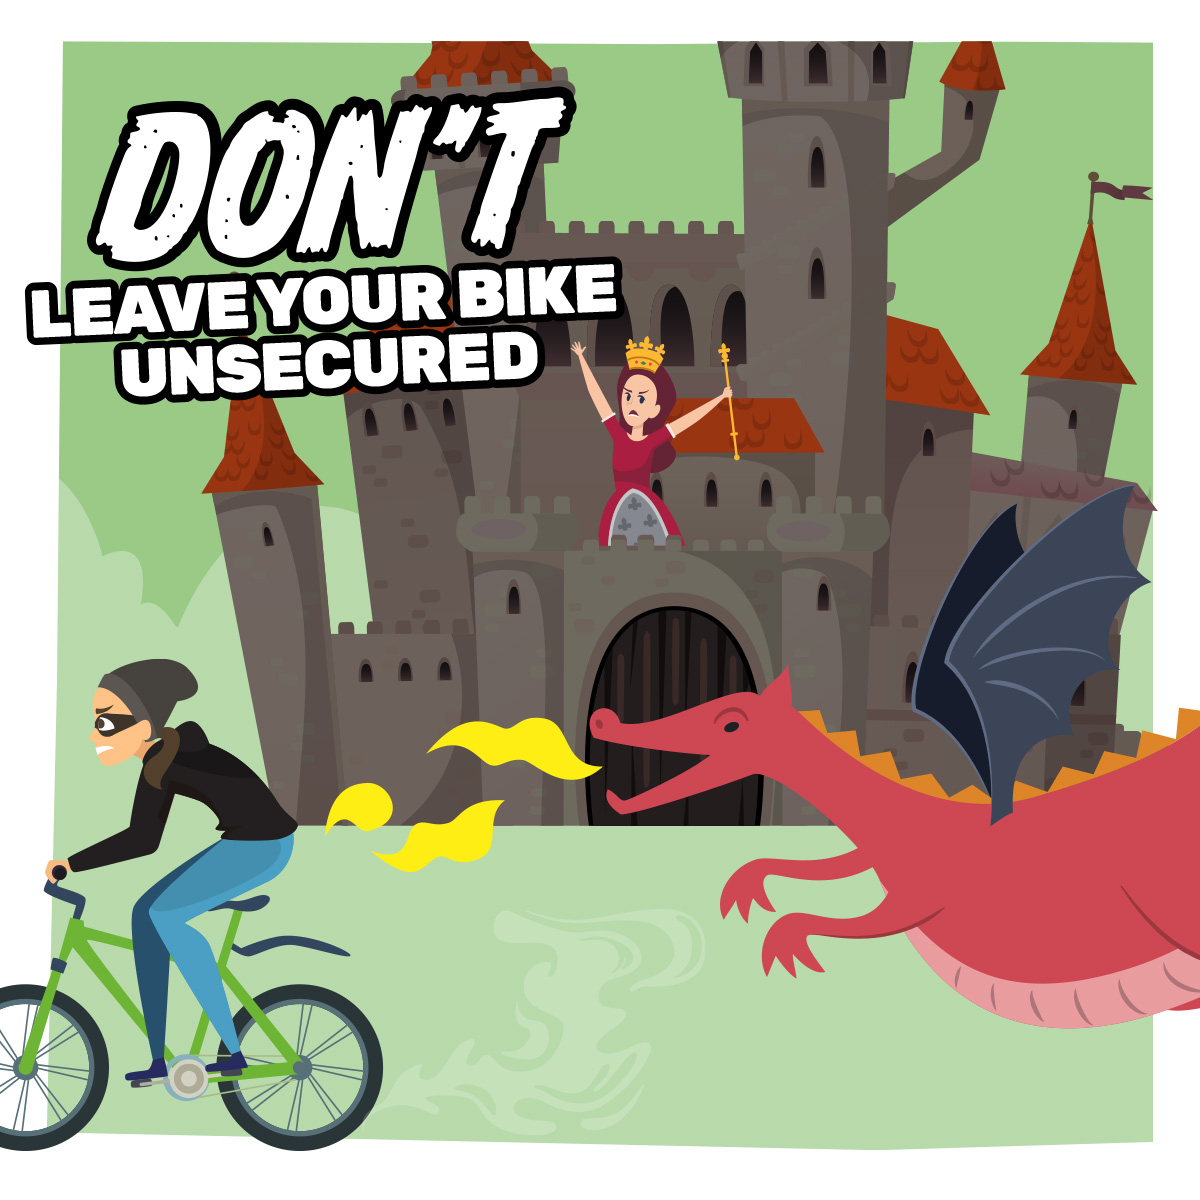 Don’t leave your bike unsecured